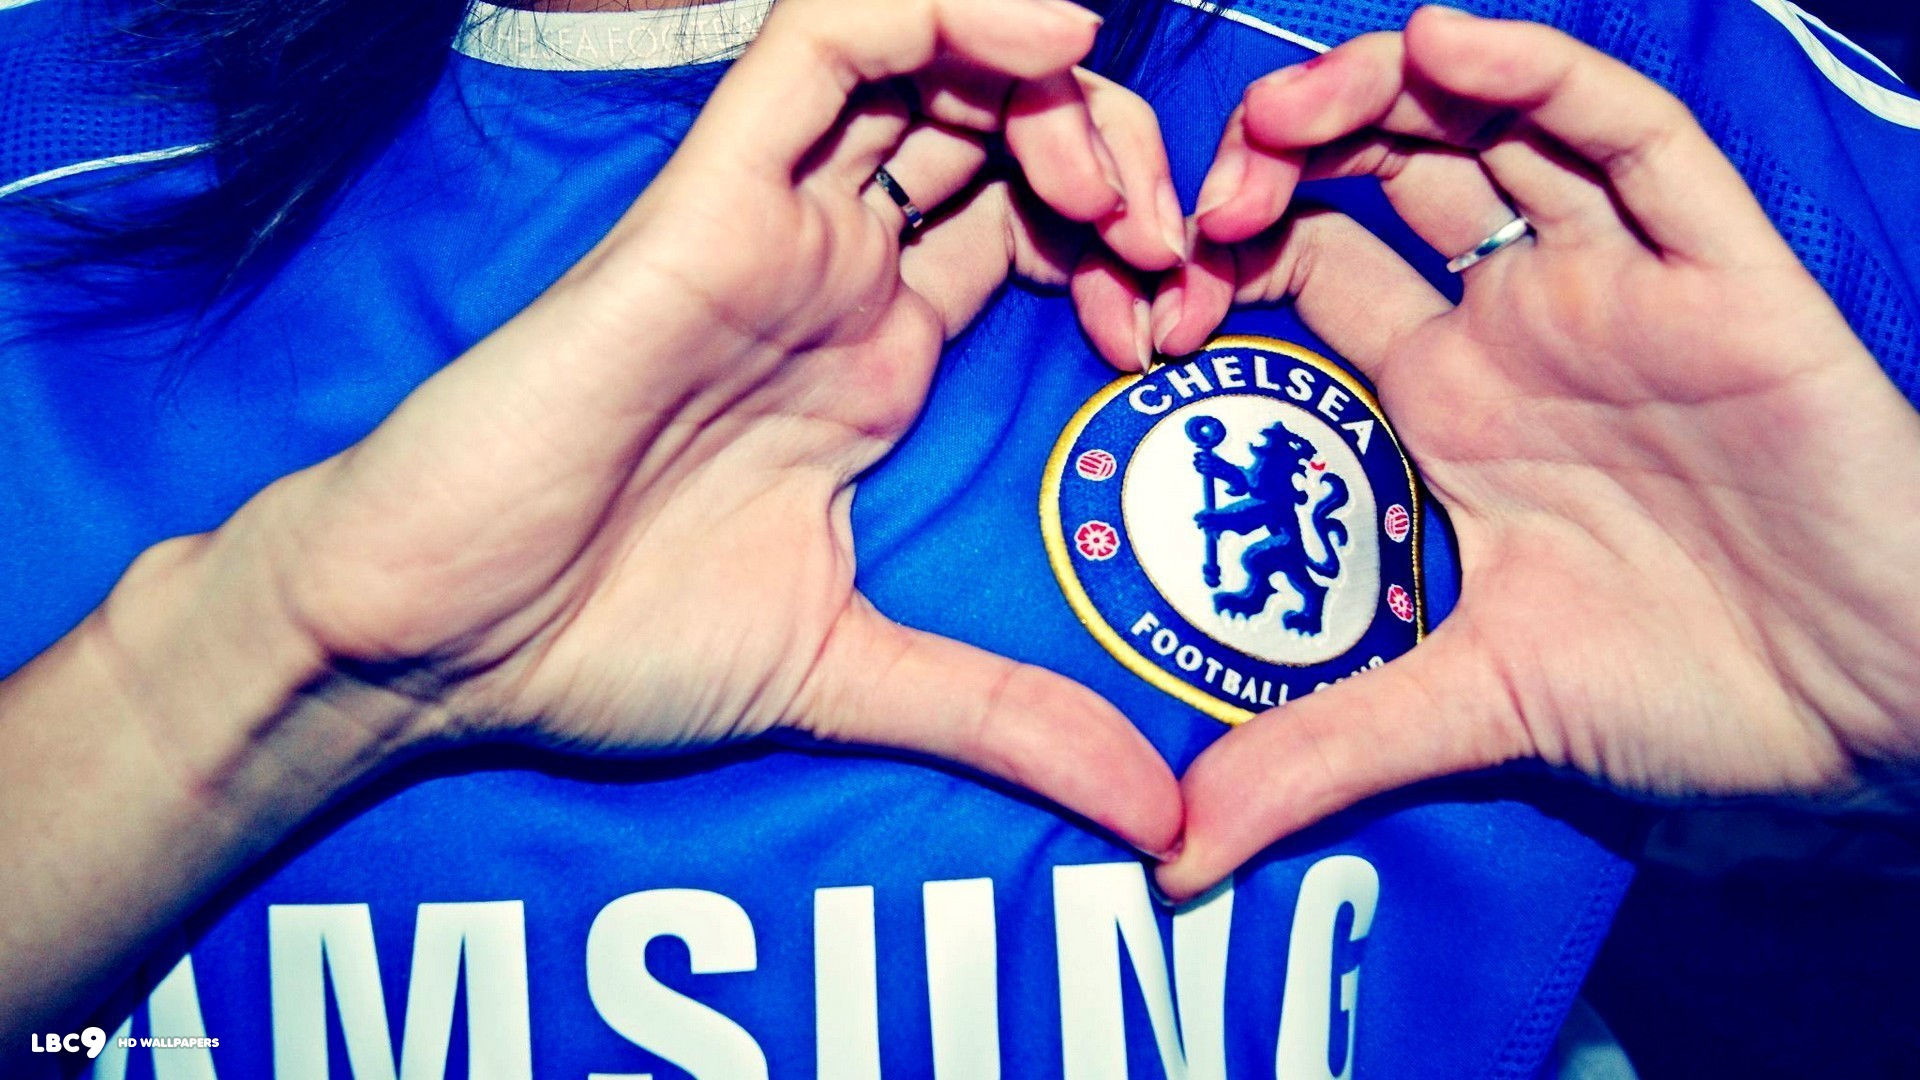 Chelsea HD Wallpapers 1080p (75+ images)